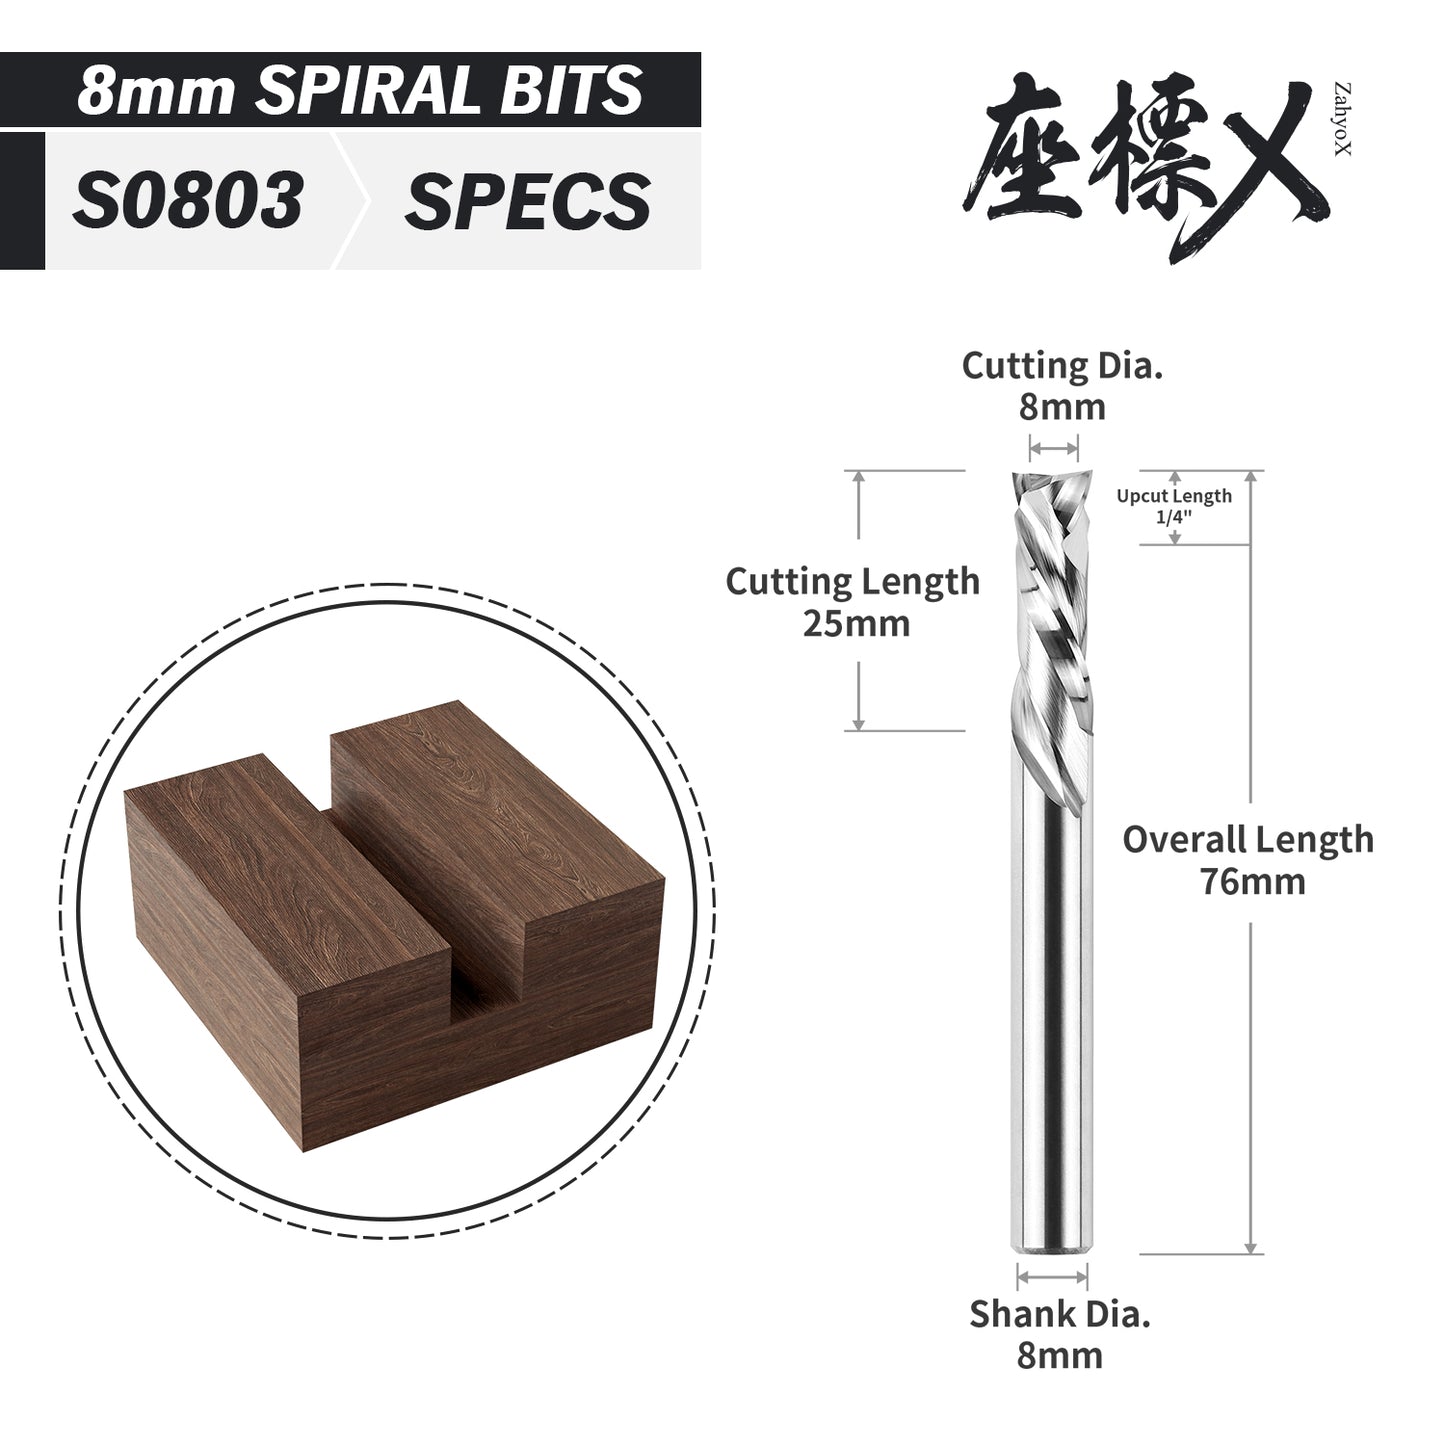 S0803 Solid Carbide Metric Compression Spiral Router Bit - 2 Flutes - 8mm SD - 8mm CD - 25mm CL - 76mm OL - 1/4 UCL